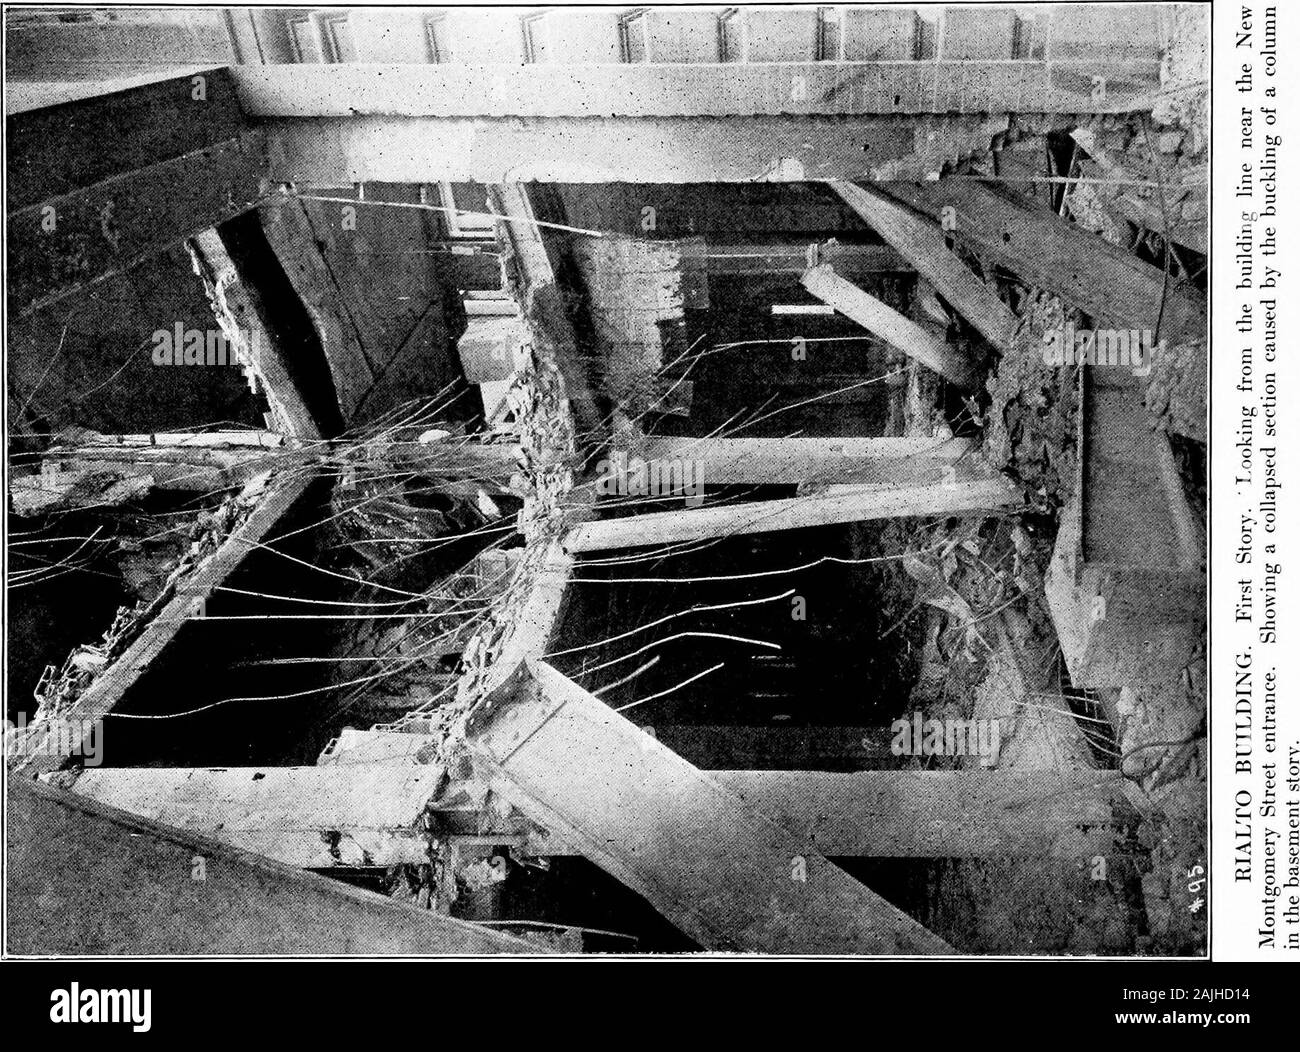 The San Francisco earthquake and fire; a brief history of the disaster; a presentation of facts and resulting phenomena, with special reference to the efficiency of building materials, lessons of the disaster . sq. Johnson steel bars at l(i centres and No. 16. 3 mesh expanded metalimbedded in it. The flat ceiling of expanded metal lath and plaster has failed in numerous places. 115 ^ a Oj 3 ^ 0) oo ?(- ci r^ 4*M ffl o ri bC C /iS 3 tr ^ ?73 ,J5 3 &gt;. ^ -Q ni -0 *^ 3 cs c o «4^ o u o ^ ^ a o ?v. 110 Stock Photo